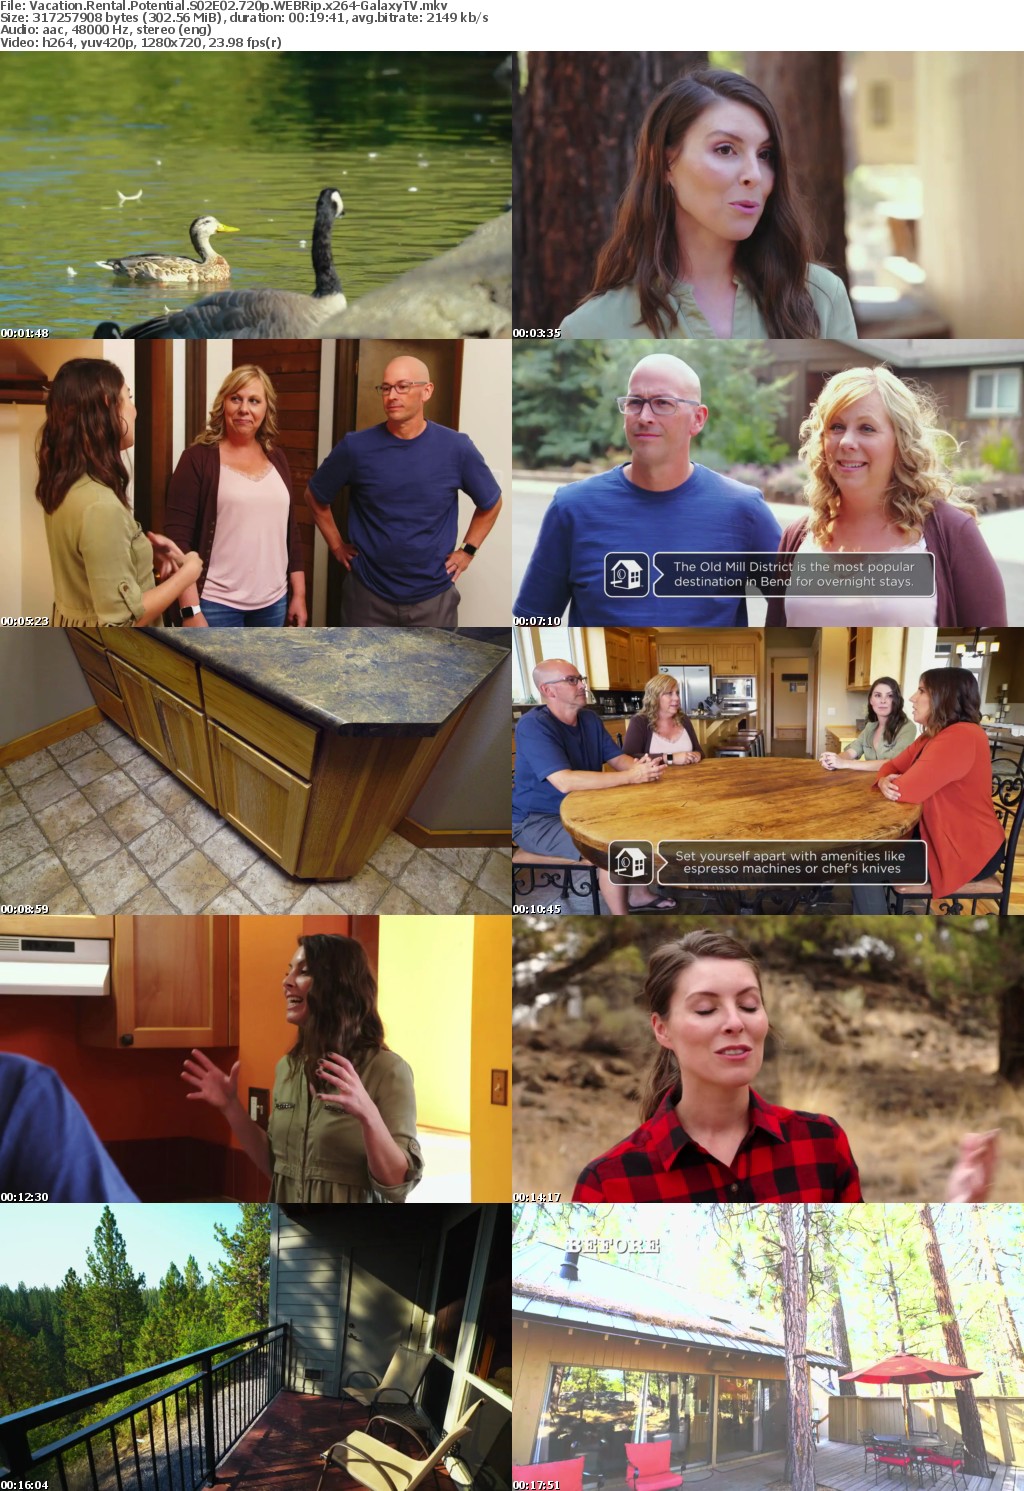 Vacation Rental Potential S02 COMPLETE 720p WEBRip x264-GalaxyTV